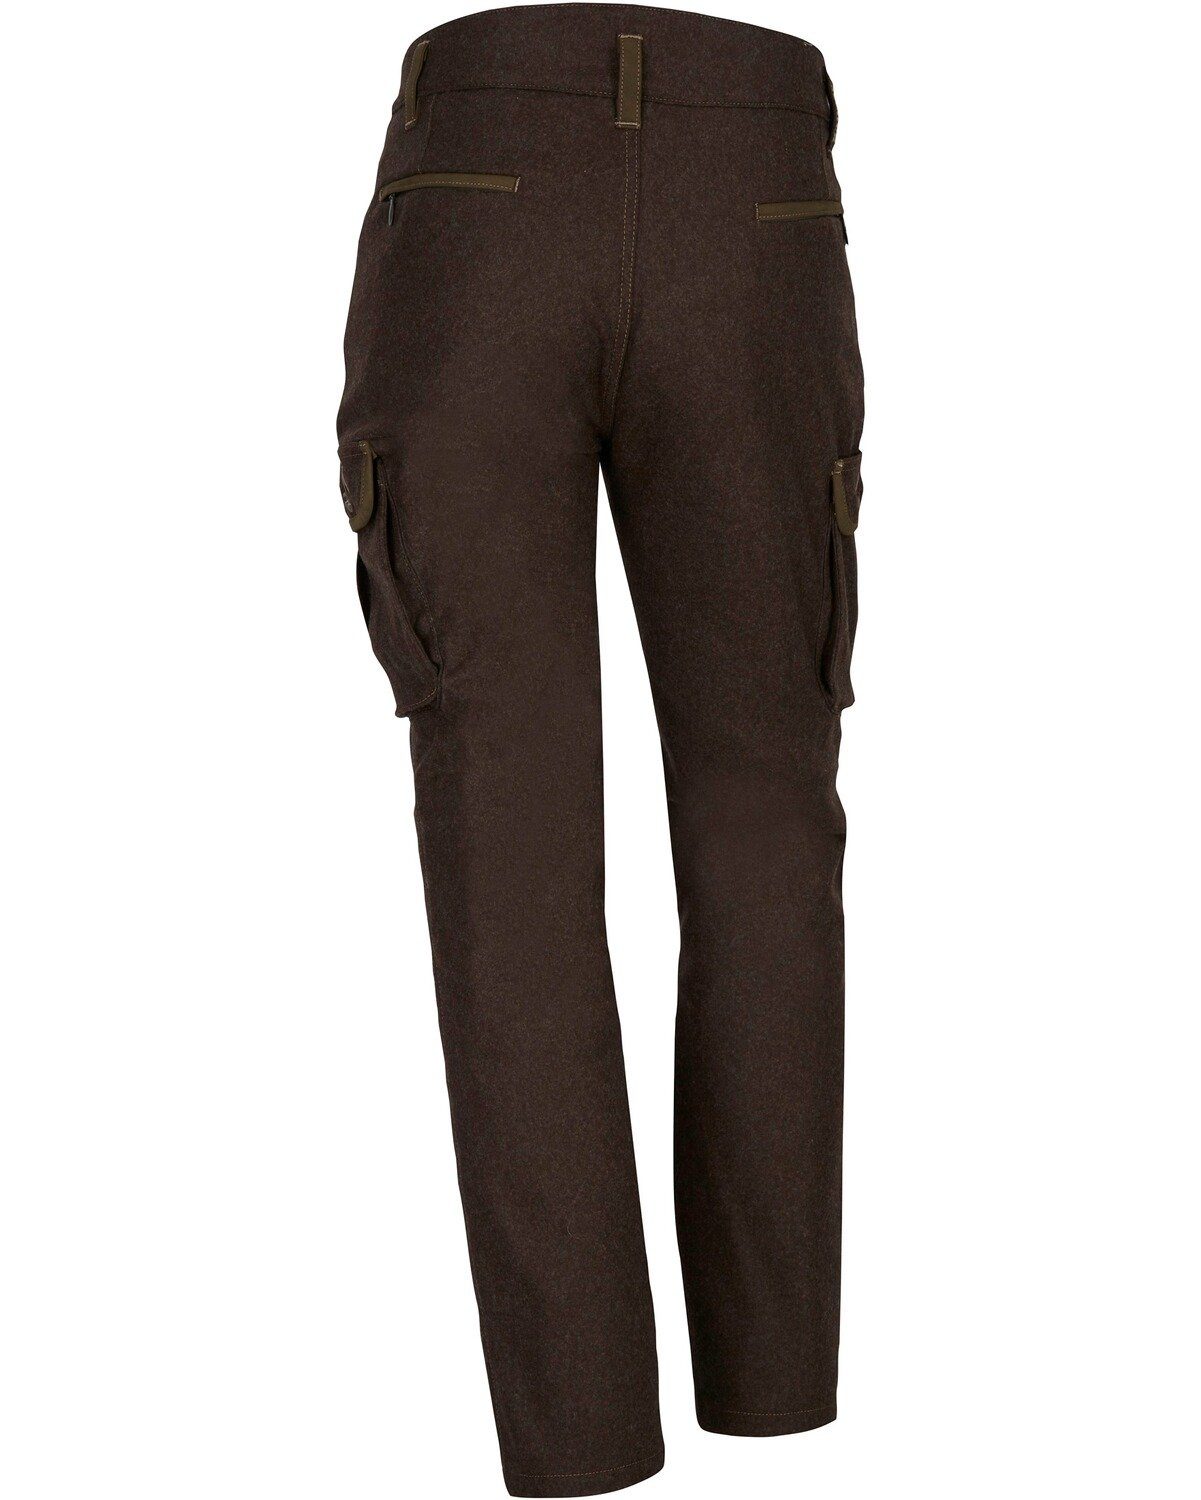 Rascher Thermo-Lodenhose Outdoorhose